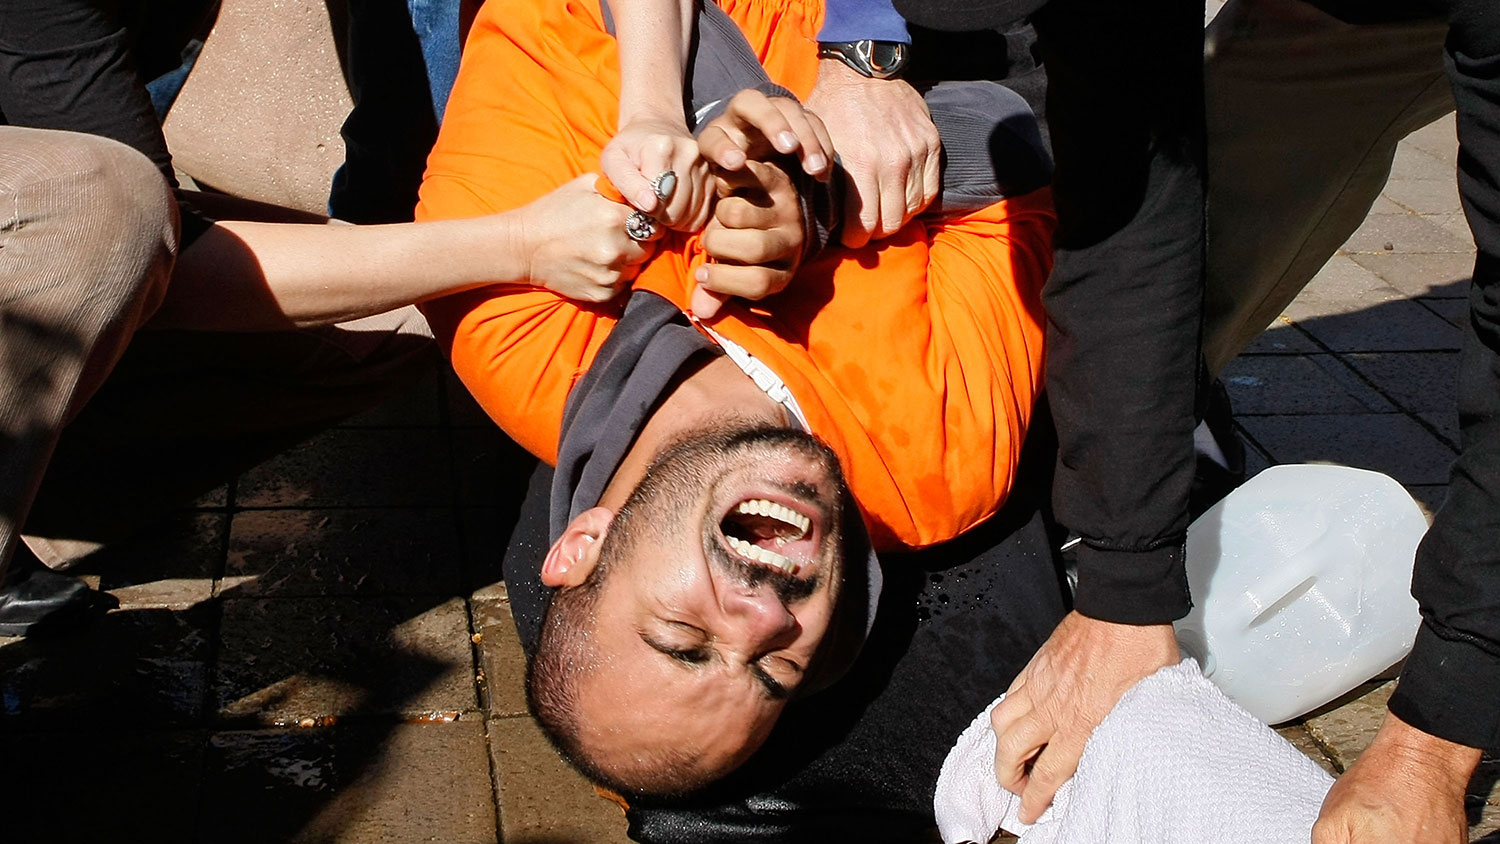 Volunteer torture victim Maboub Ebrahimzdeh is restrained as human-rights activists demonstrate waterboarding on him in front of the Justice Department on Nov. 5, 2007, in Washington.
